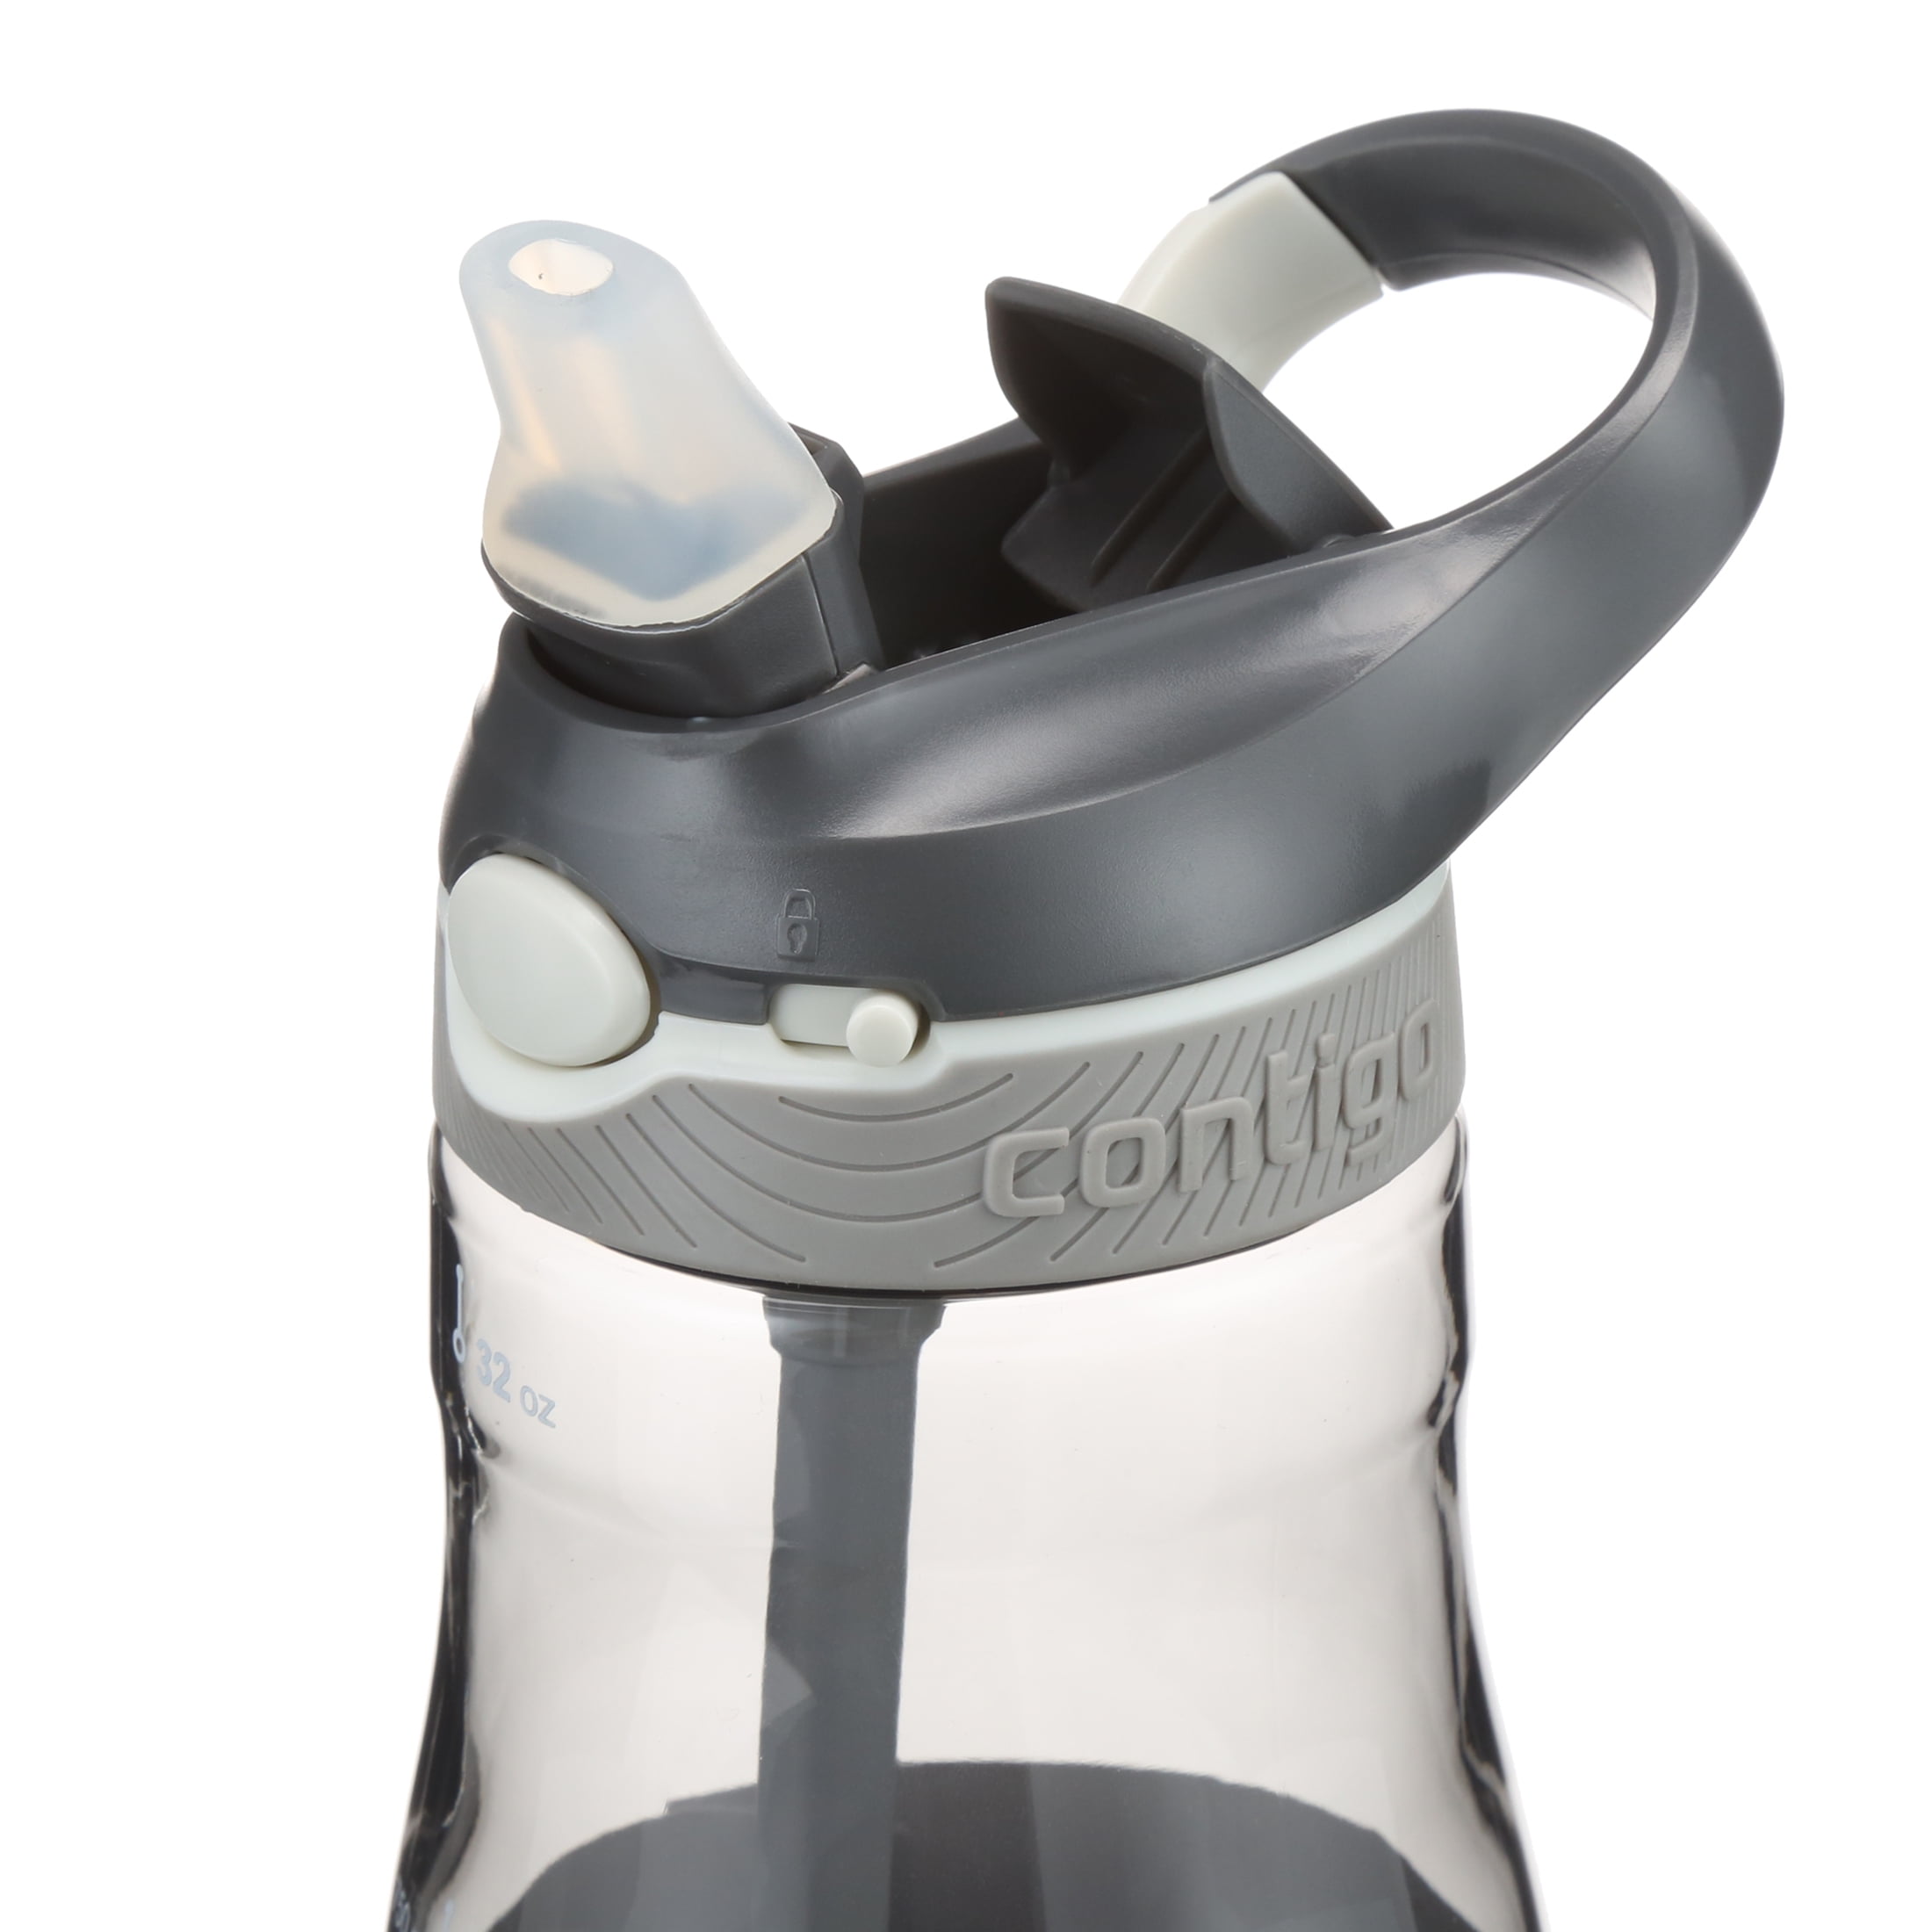 Contigo Ashland 32 oz Smoke and Brown Plastic Water Bottle with Straw and  Wide Mouth Lid 